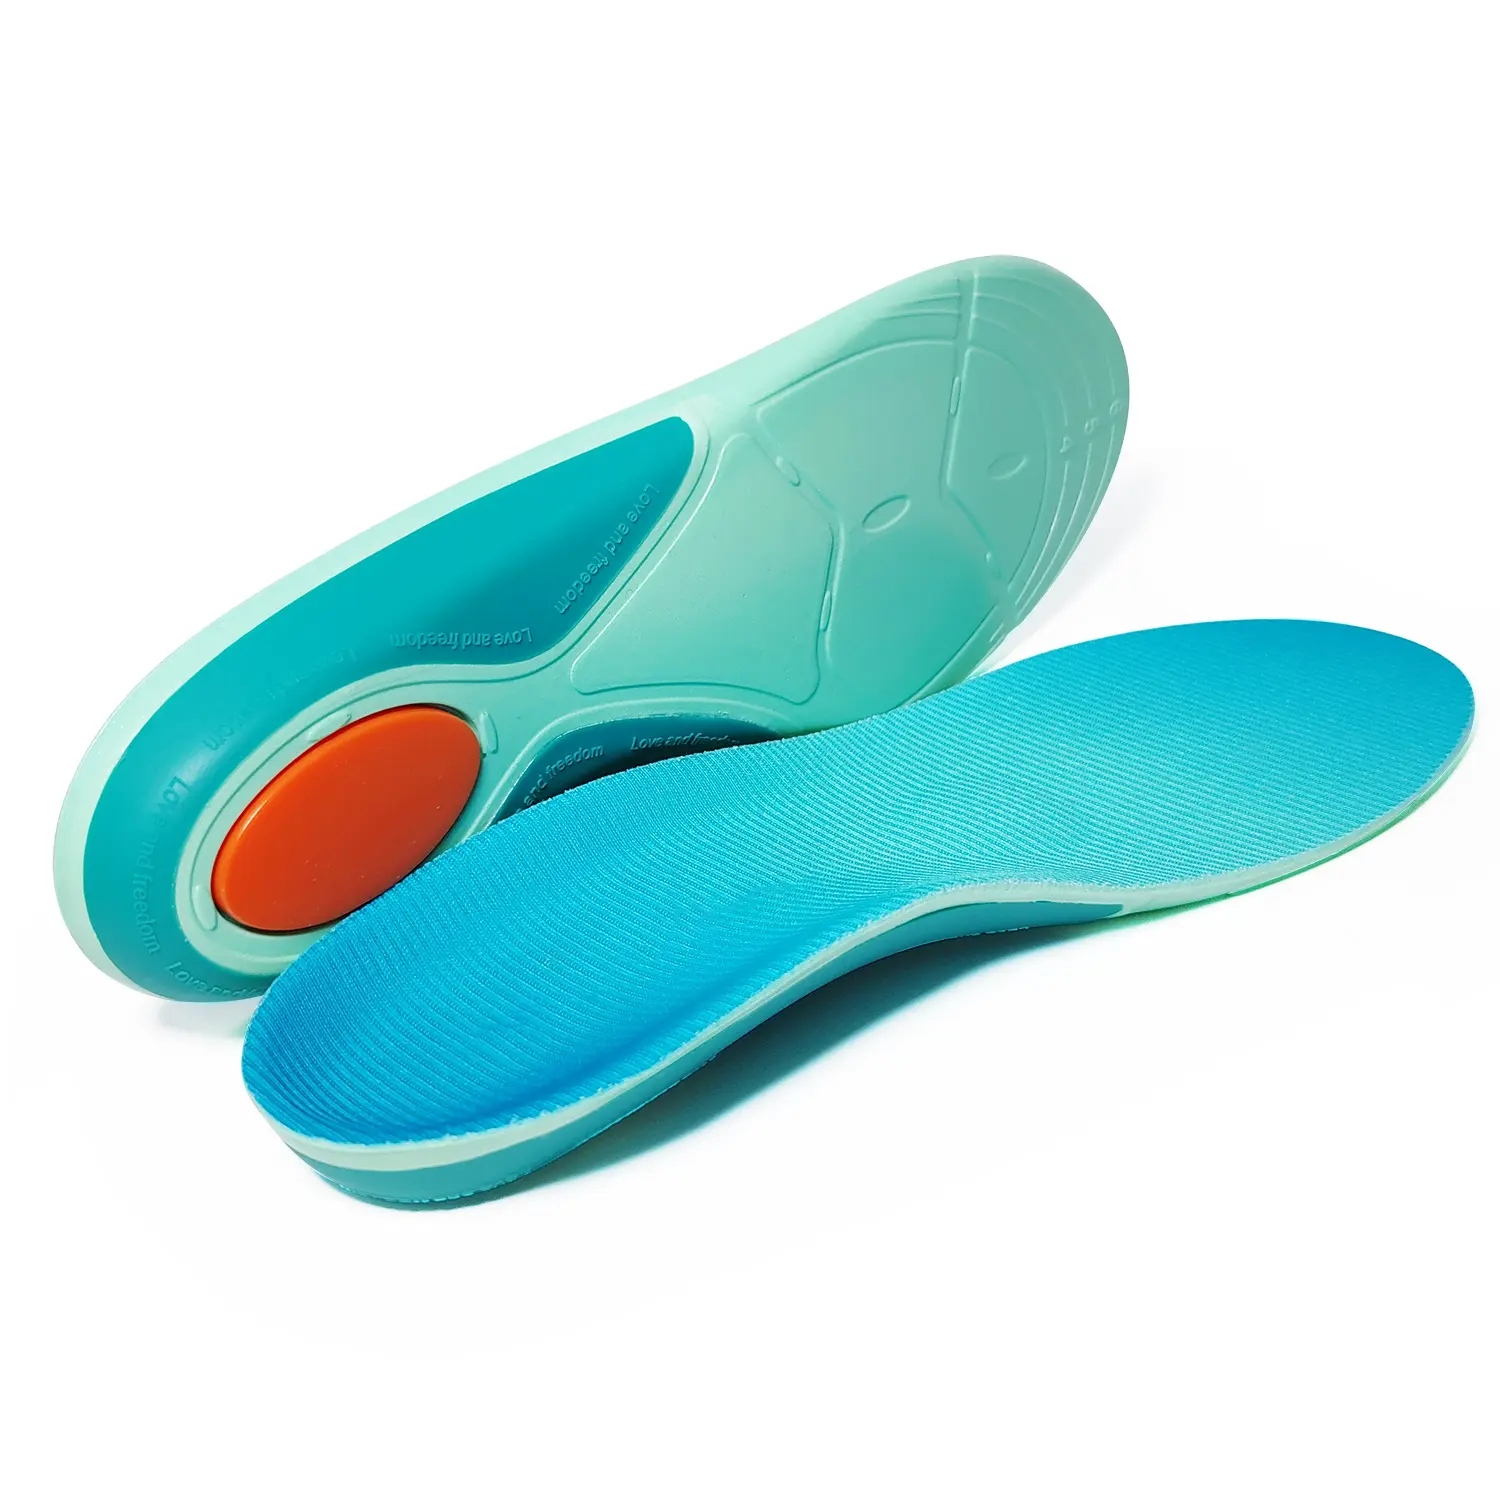 Anti Shock Running Insert Active Performance Arch Support Fitness Walking Sports Comfort Insoles